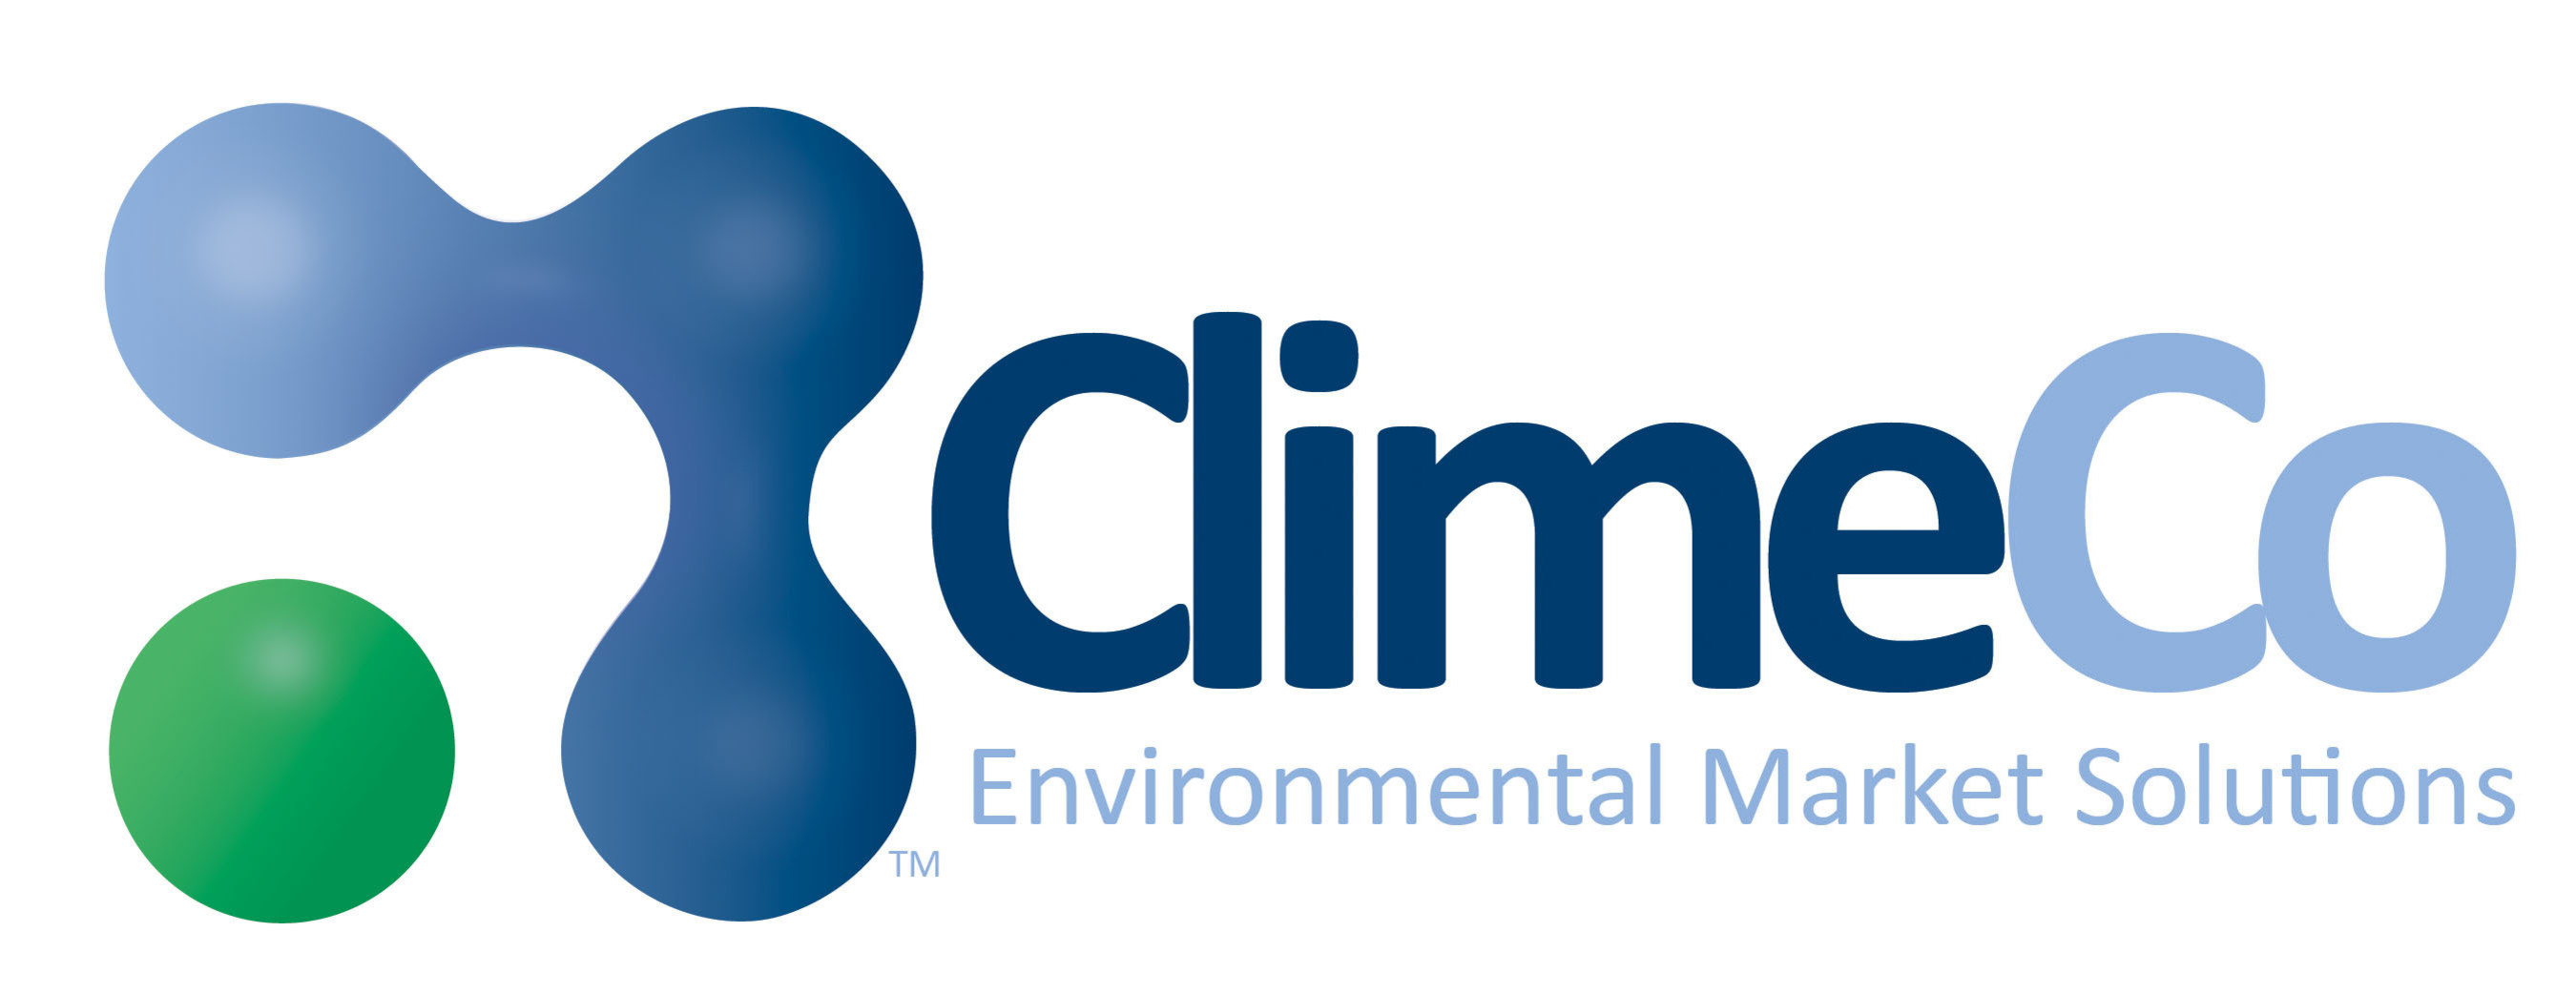 ClimeCo Corporation is a developer, broker and advisor of environmental commodity market products and air quality technology systems with specialized expertise in California cap-and-trade and voluntary market advisory and transactional services, and project financing of internal CO2 abatement systems. Deep-rooted partnerships with trading, investment and technology firms further amplify ClimeCo's service menu to provide collaborative, full-circle solutions that reduce emissions and fulfill environmental obligations. Contact us. http://www.climeco.com/.